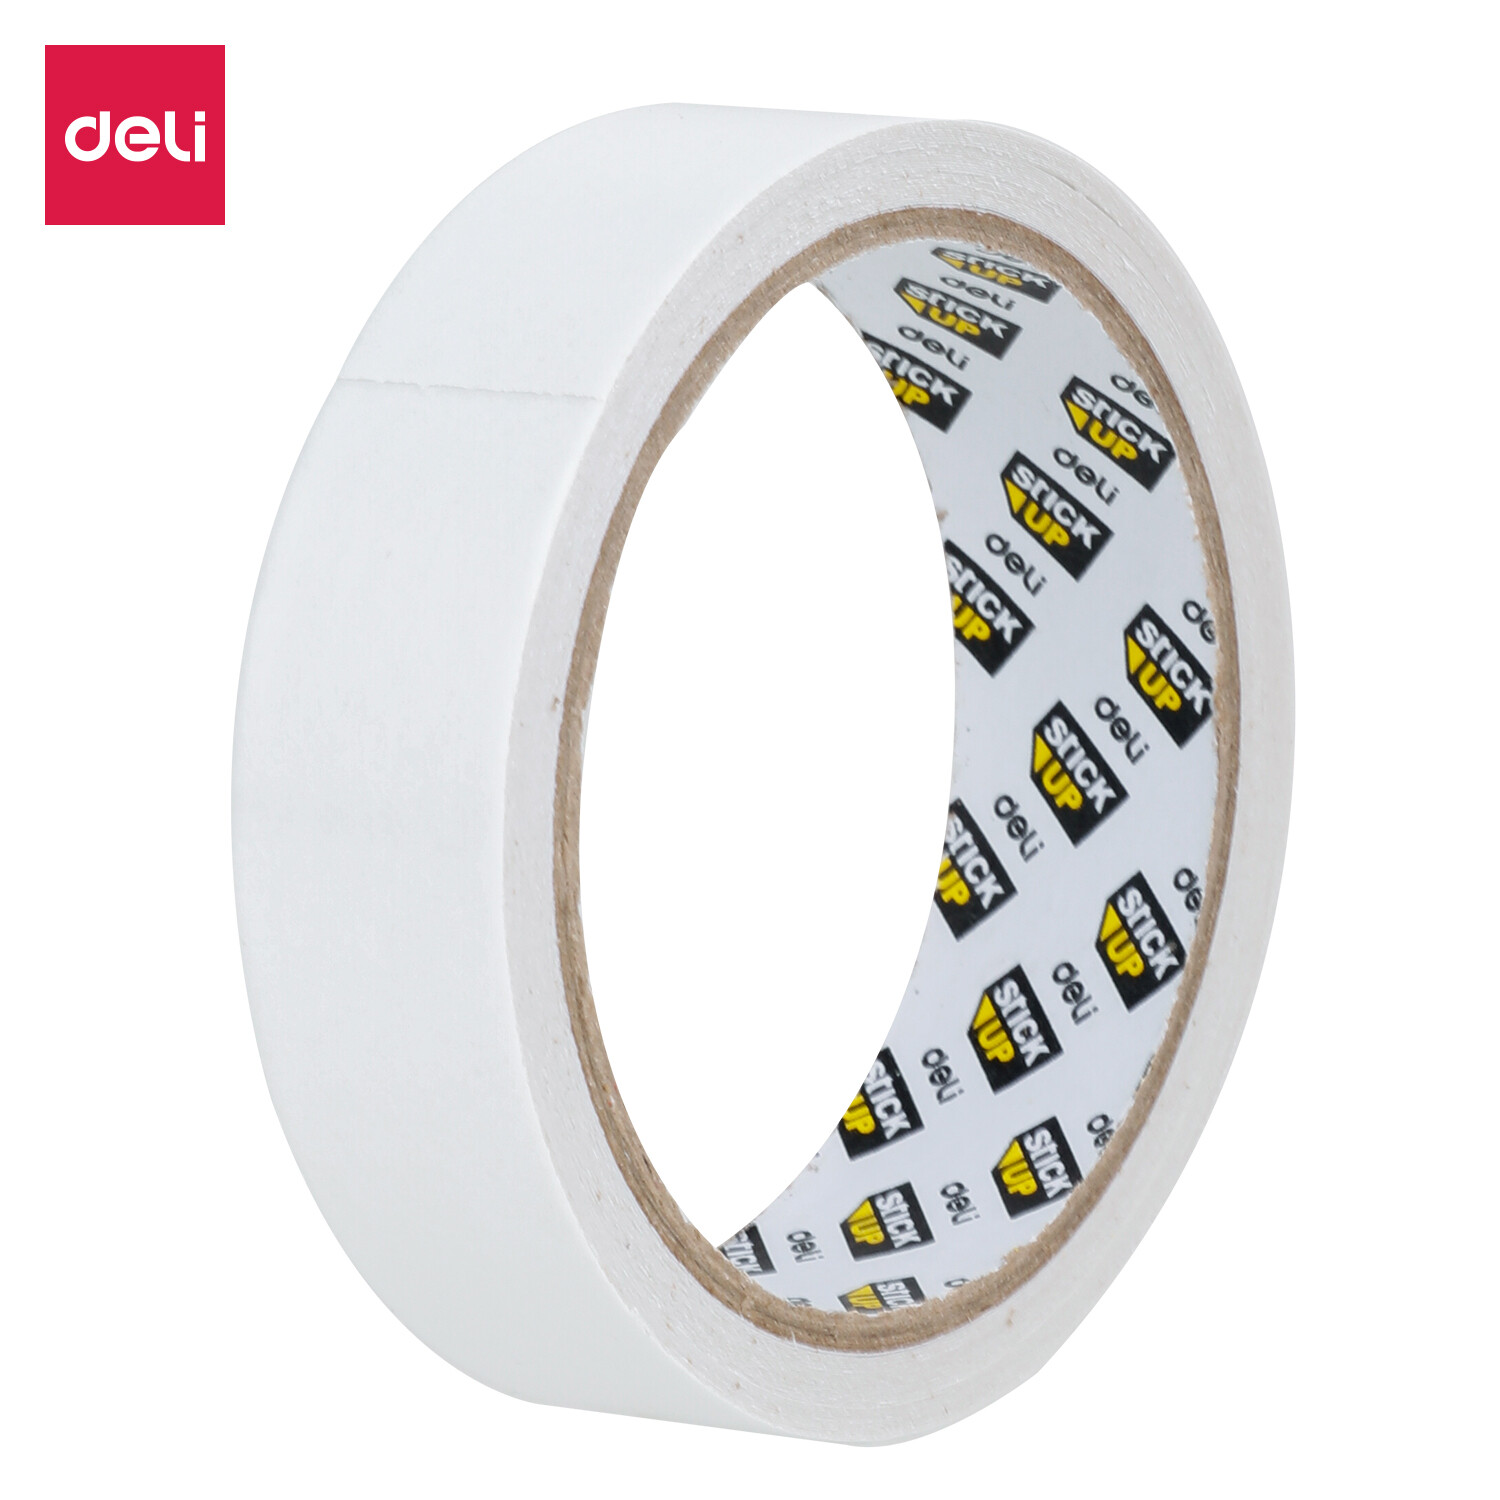 Deli Double-Sided Tape (1&quot; x 10m, Best Price!) E30407